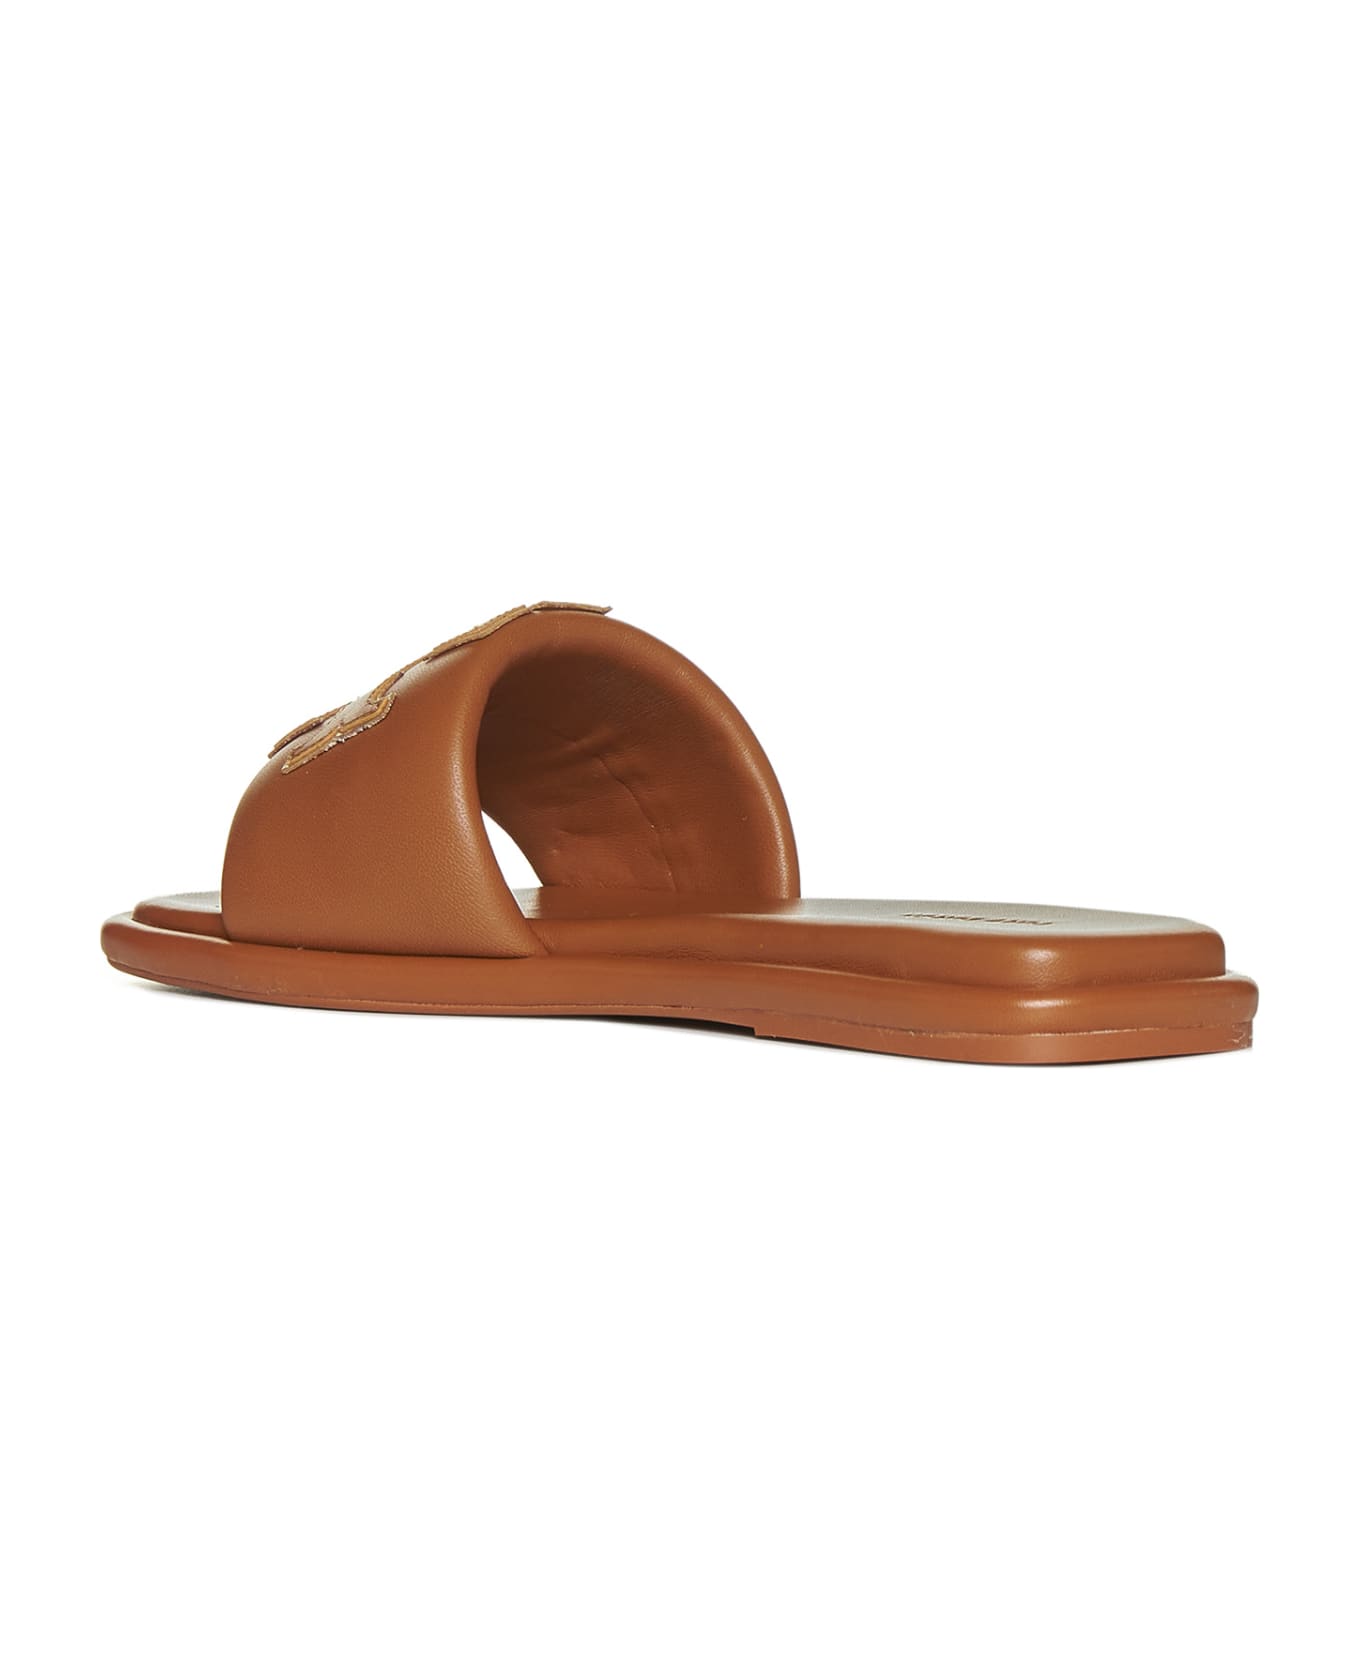 Tory Burch Double T Leather Slides - Brown